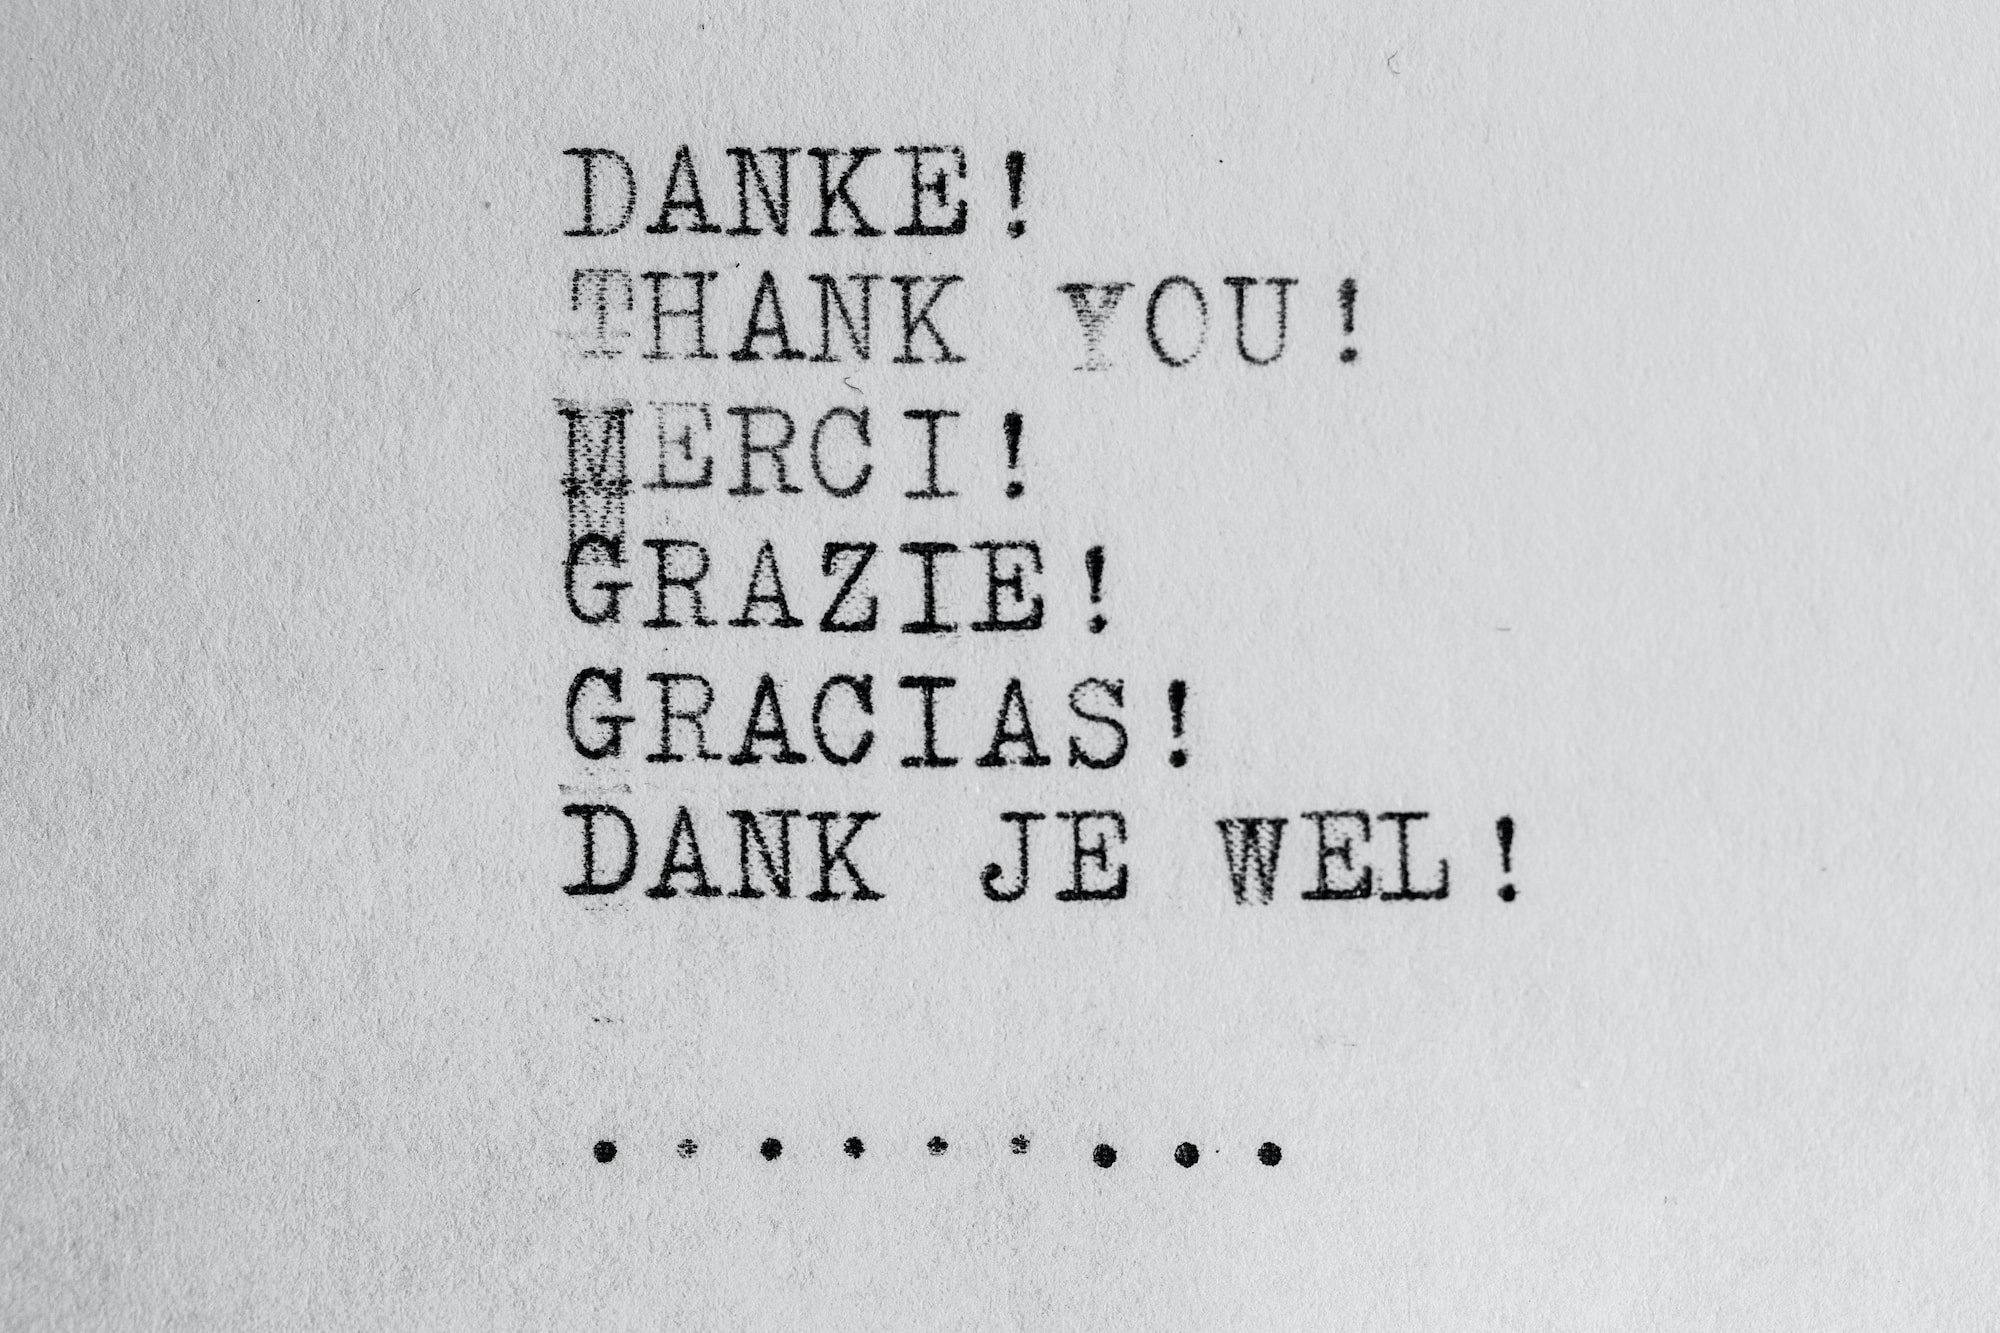 Grey rectangular card with thank you displayed in five different languages